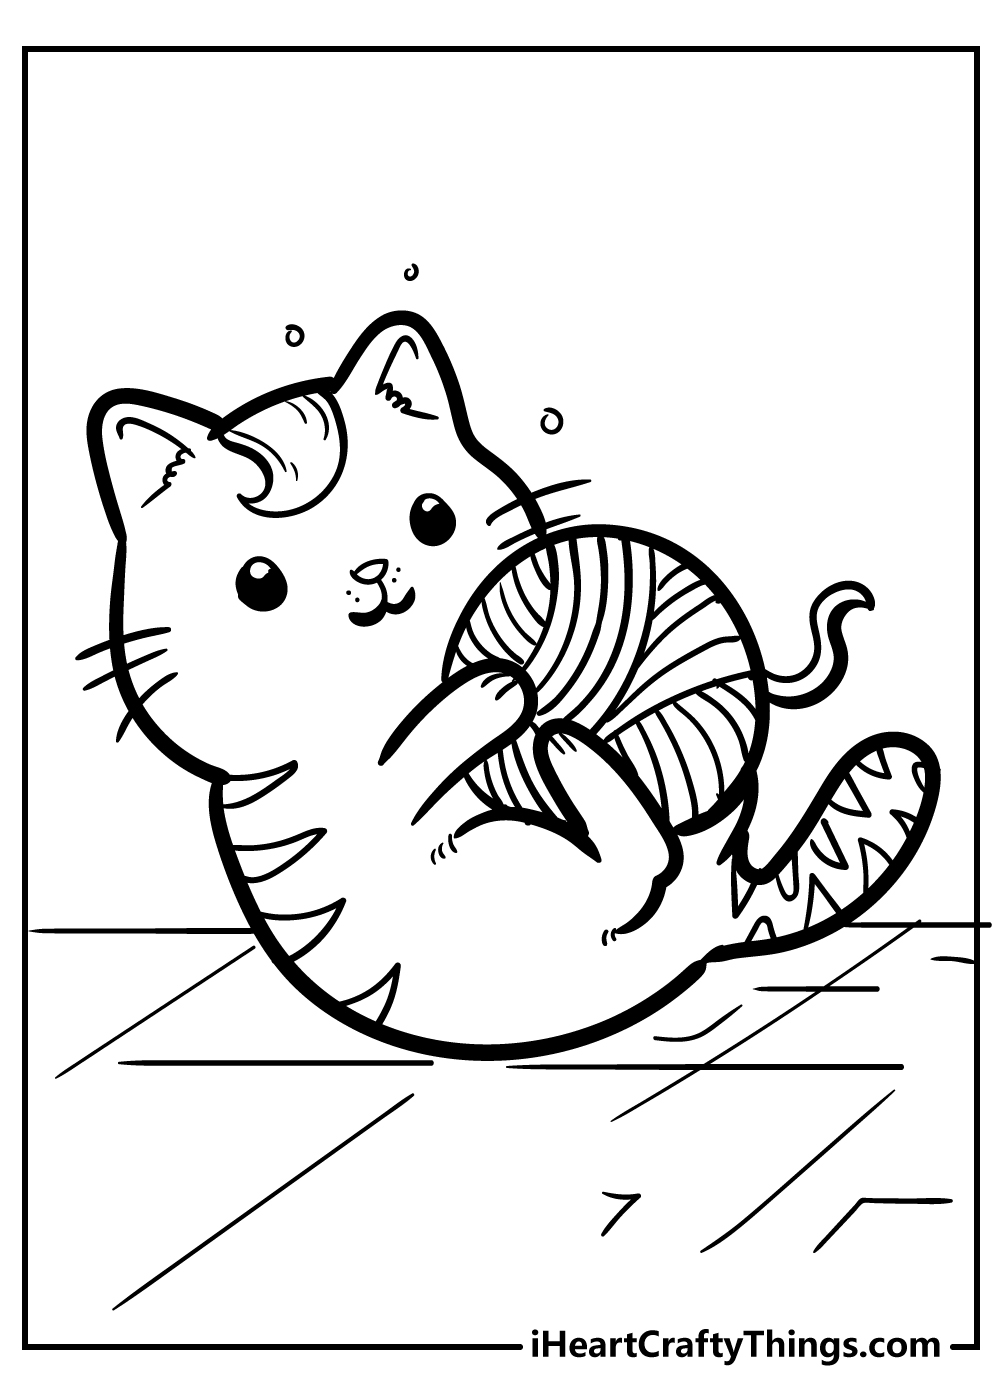 20 Kitten Coloring Pages